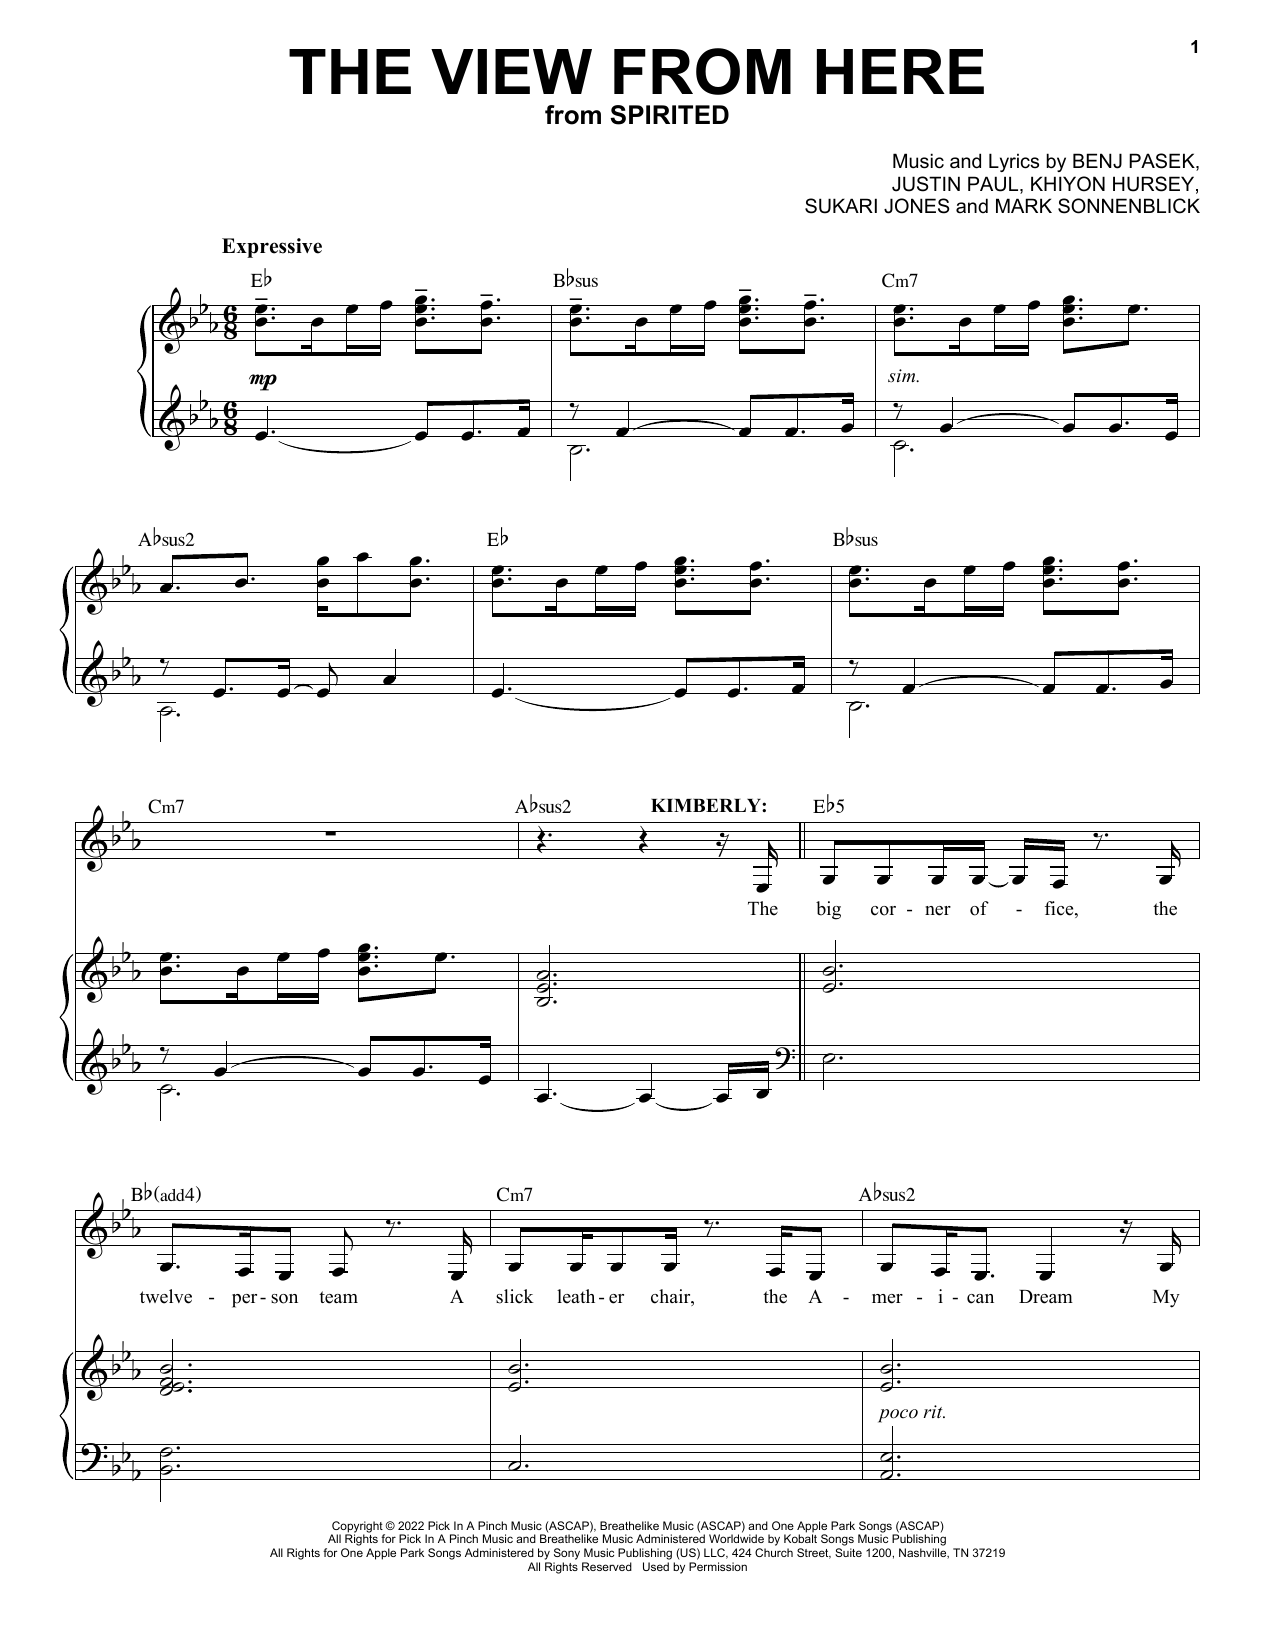 Download Pasek & Paul The View From Here (from Spirited) Sheet Music